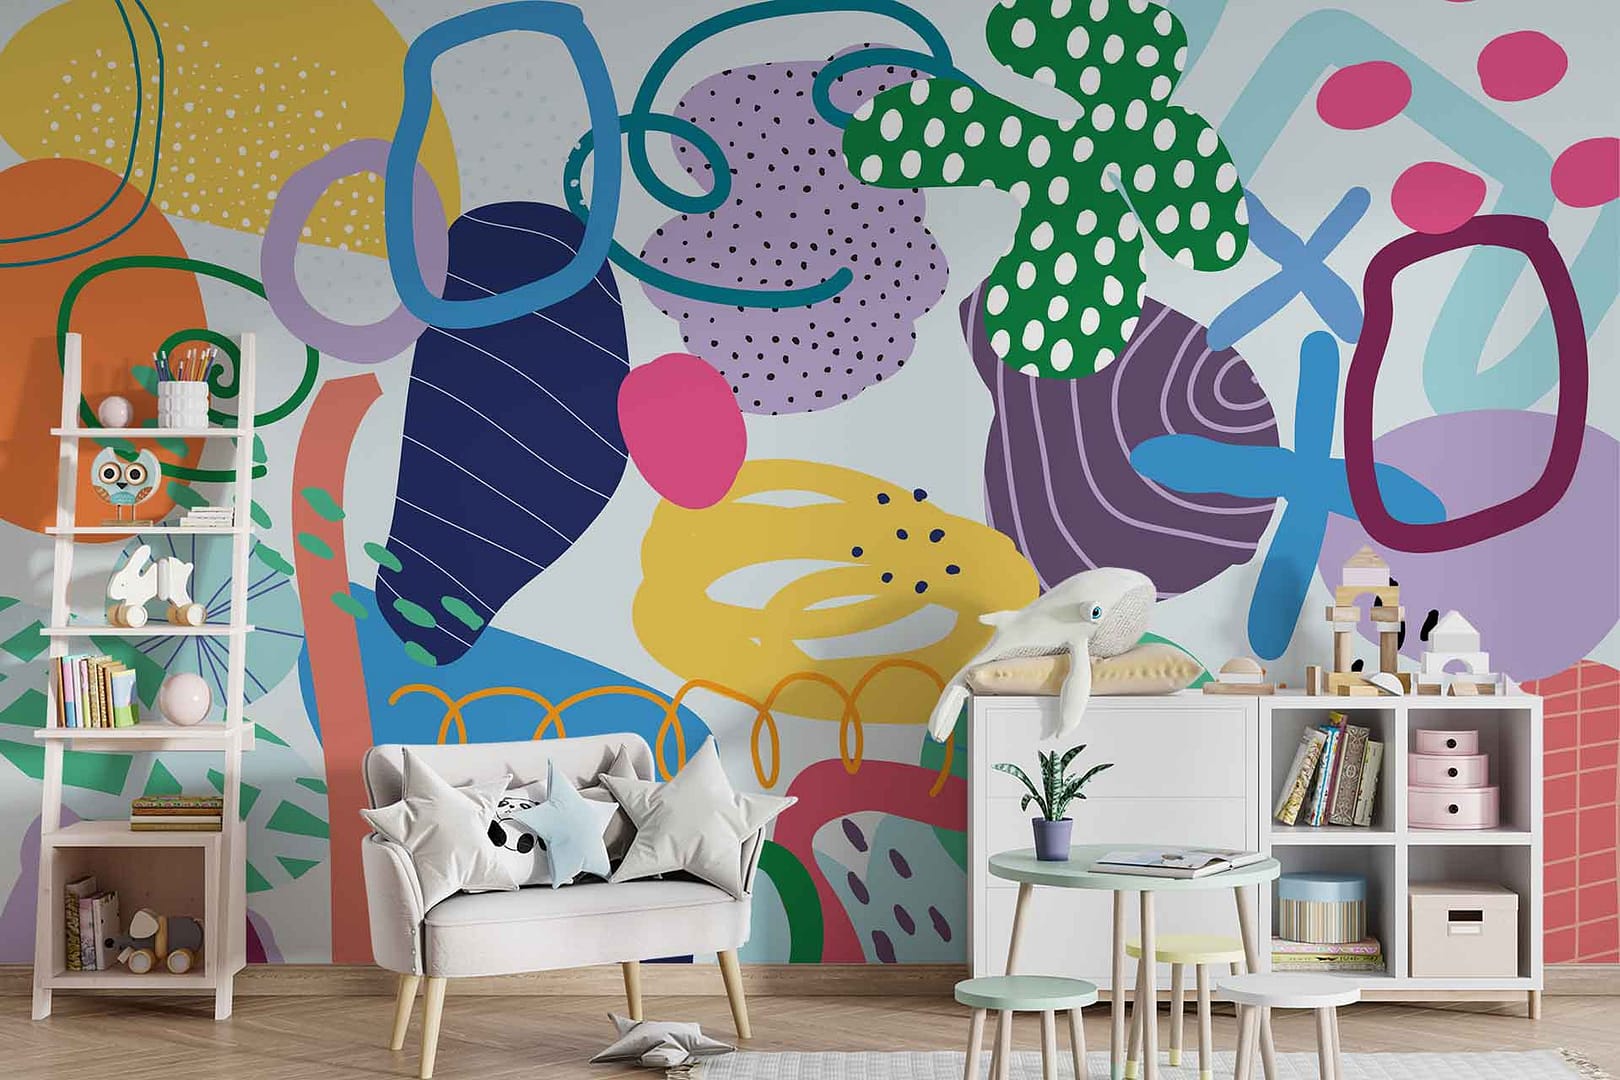 Freestyle - a wallpaper made up of various graphic shapes in bright colours by Cara Saven Wall Design